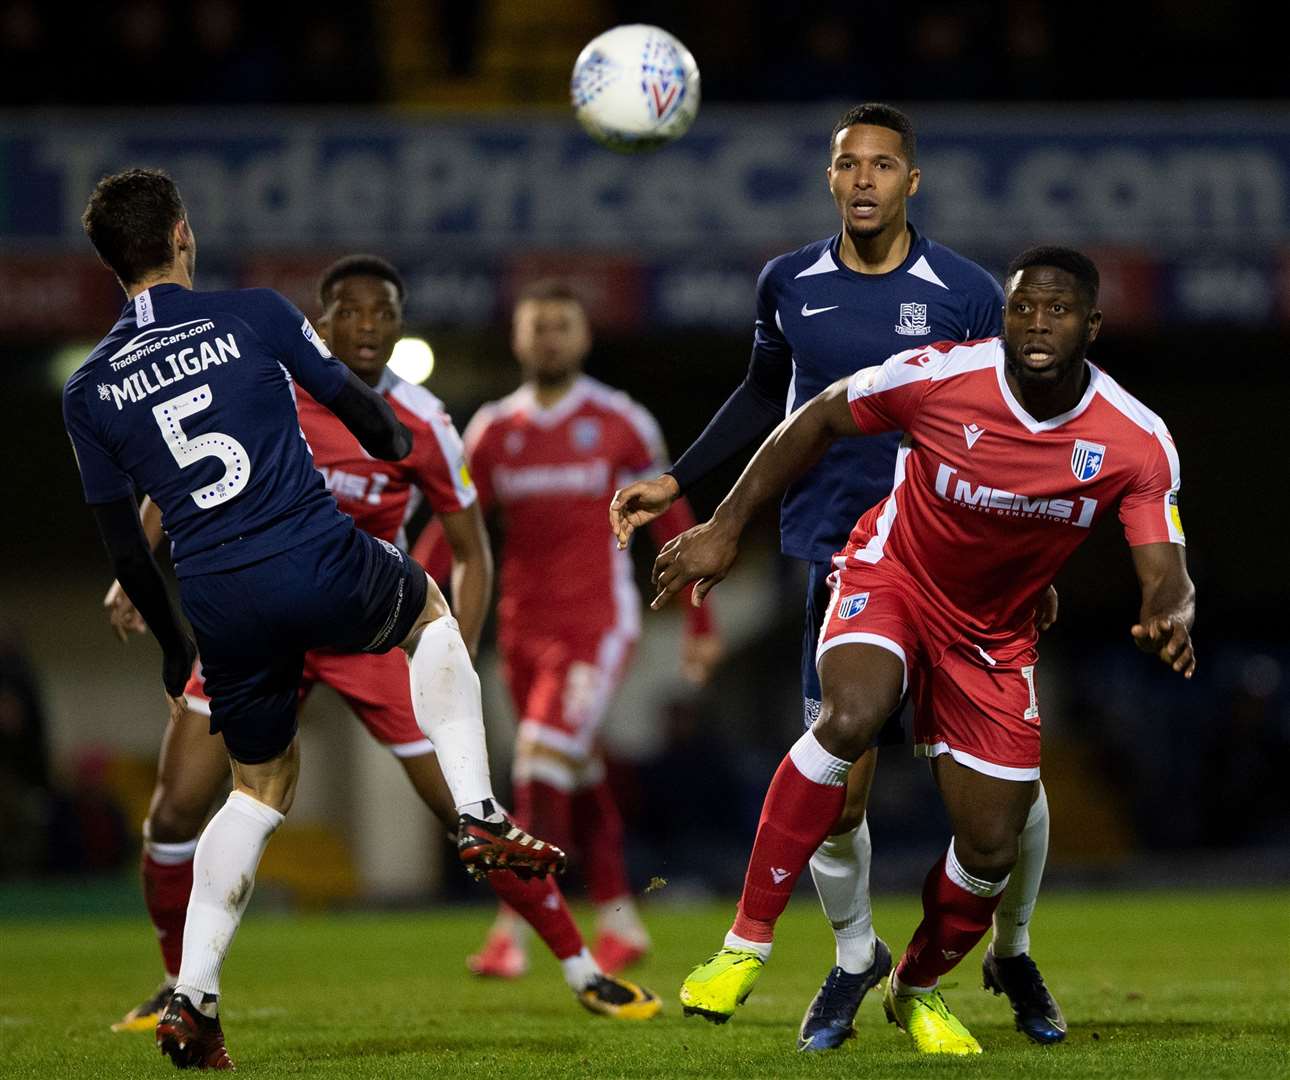 John Akinde challenges for the ball against a Southend man on Tuesday night. Picture: Ady Kerry